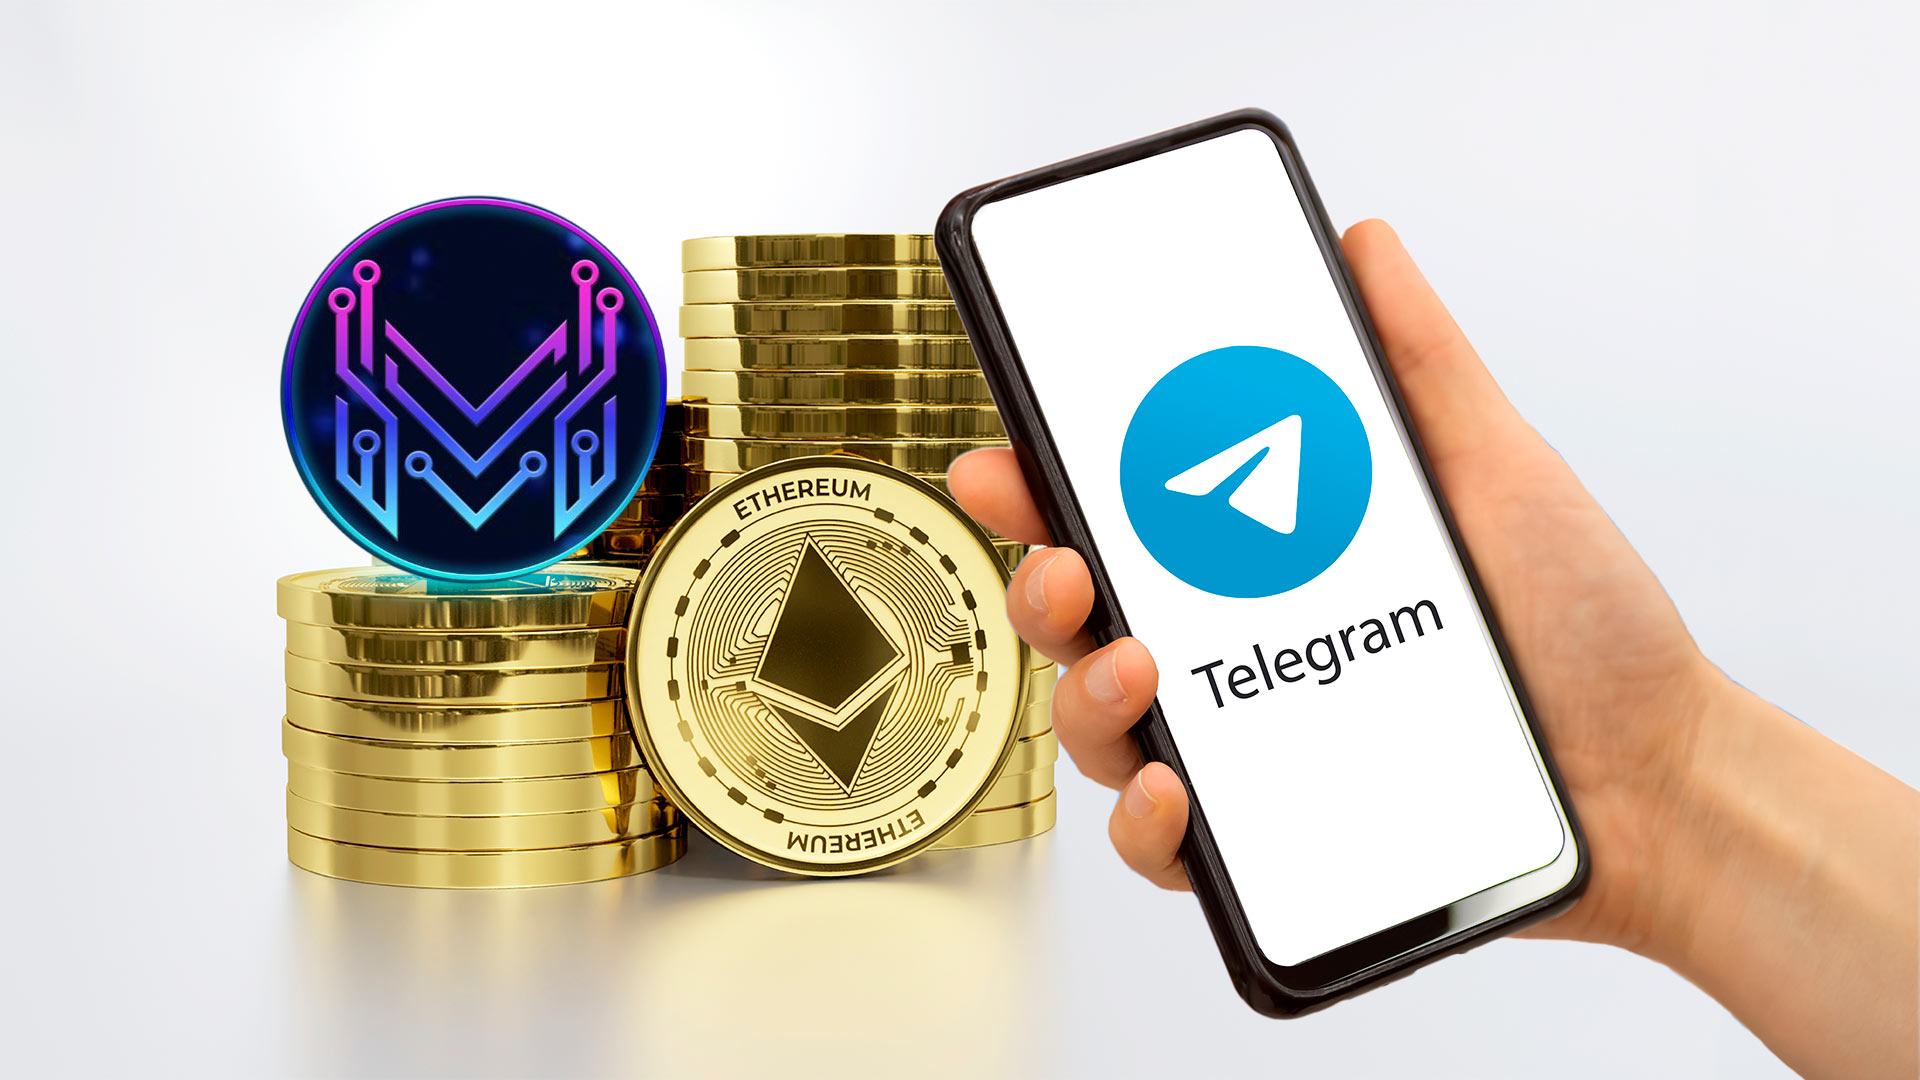 What are Telegram Trading Bots and How Do You Use Them?